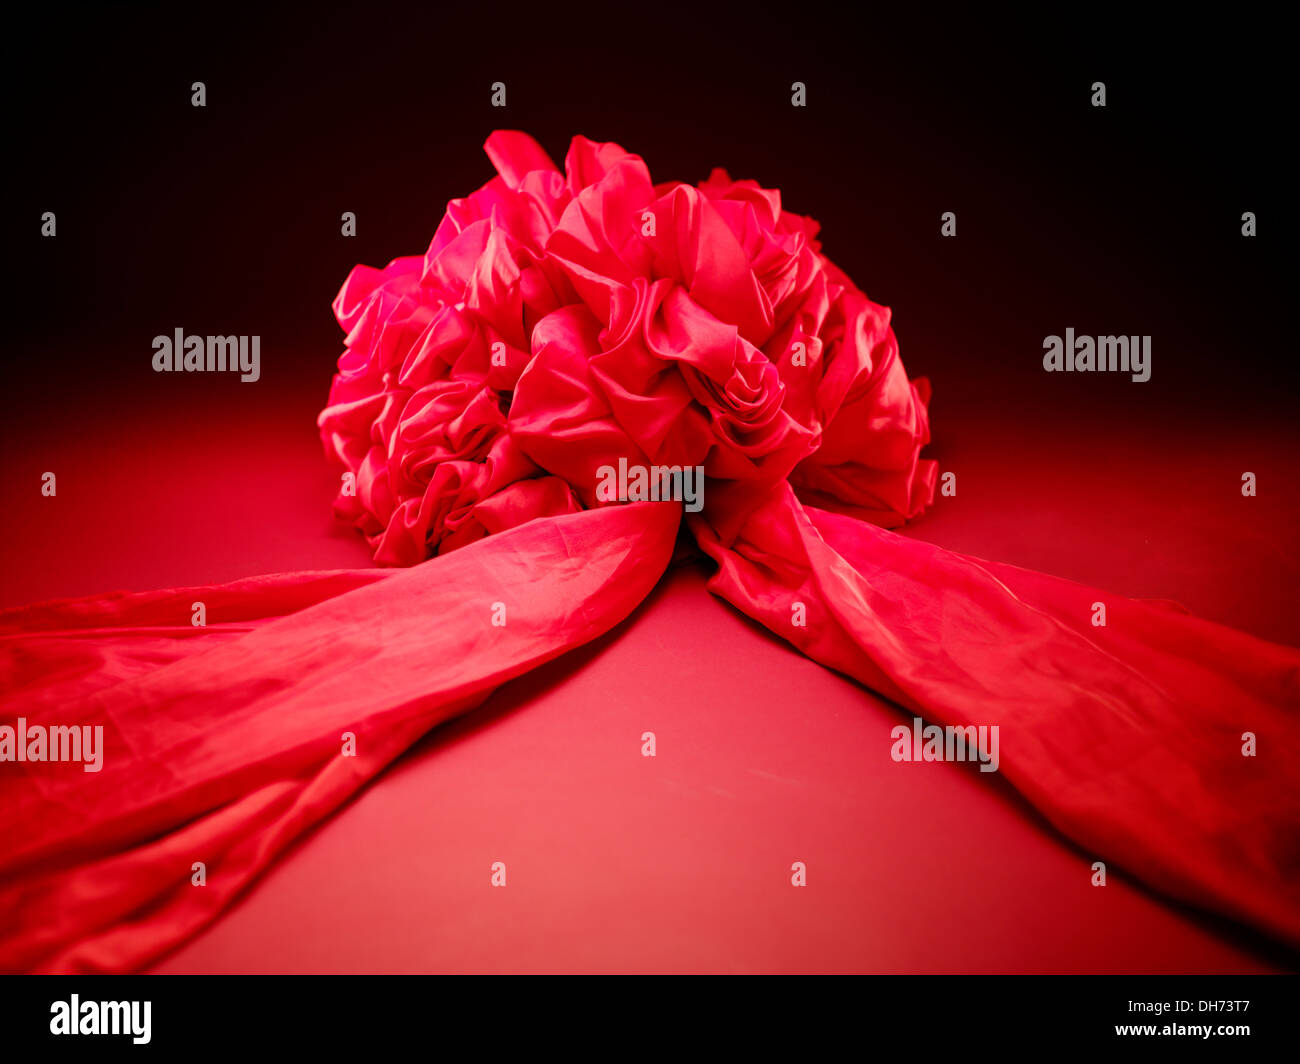 Chinese traditional wedding decoration, red silk flower Stock Photo